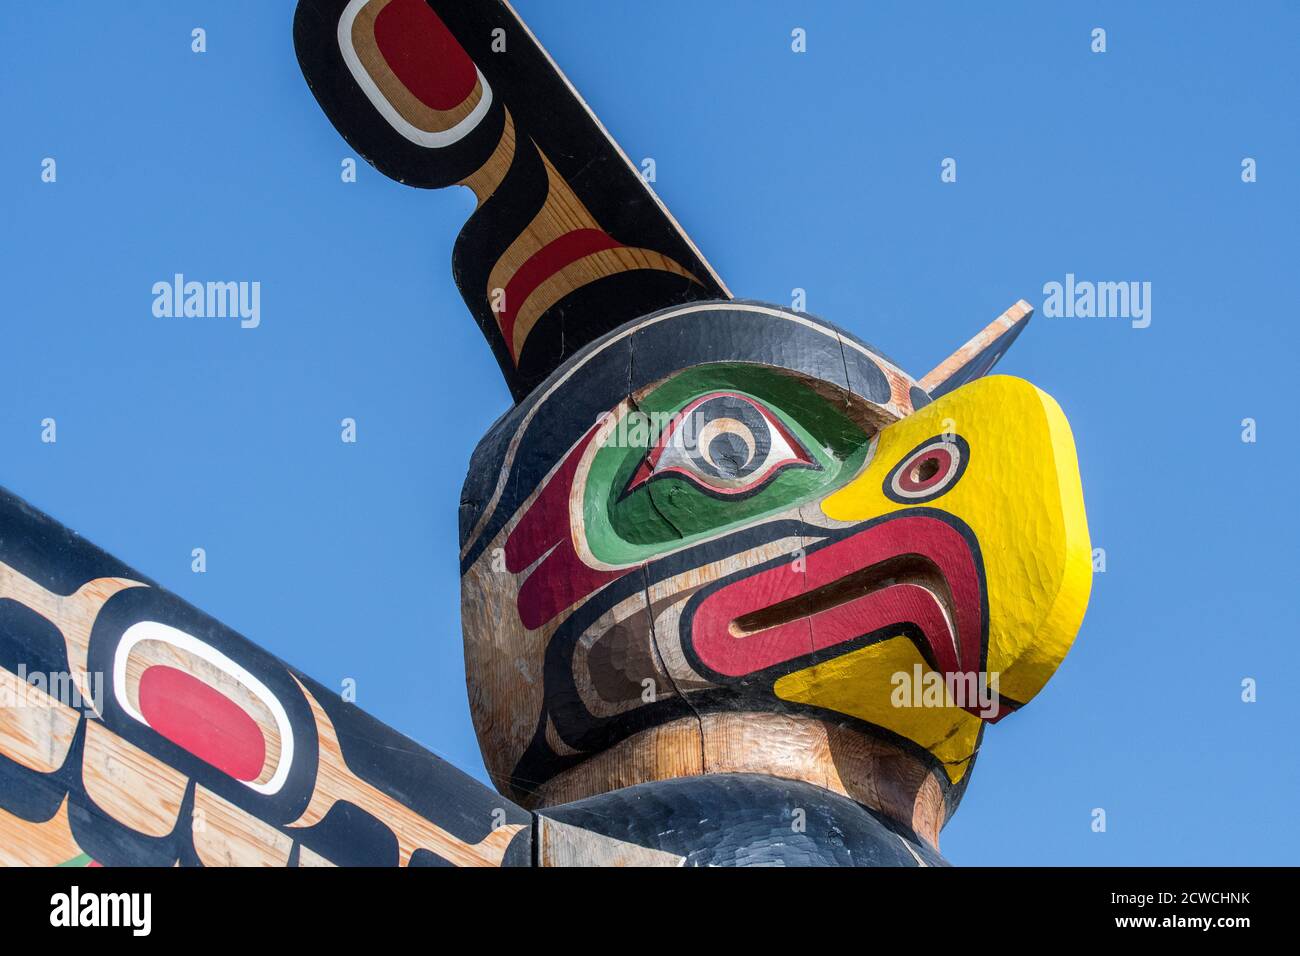 Colourful wooden carved Canadian totem pole showing eagle's head against blue sky Stock Photo